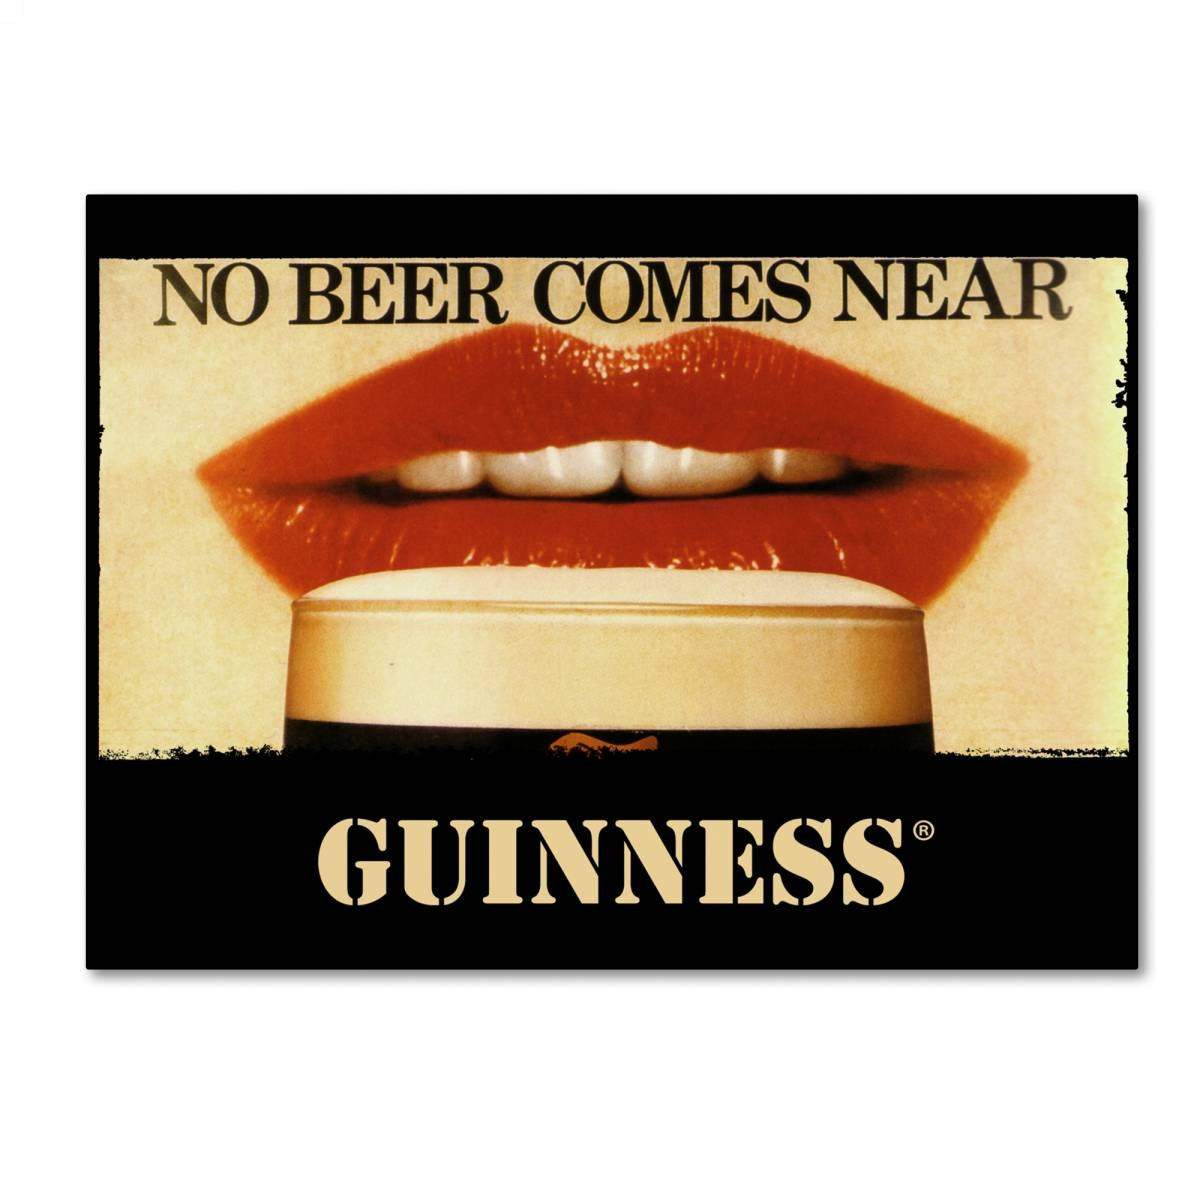 Guinness Brewery 'No Beer Comes Near' Canvas Art